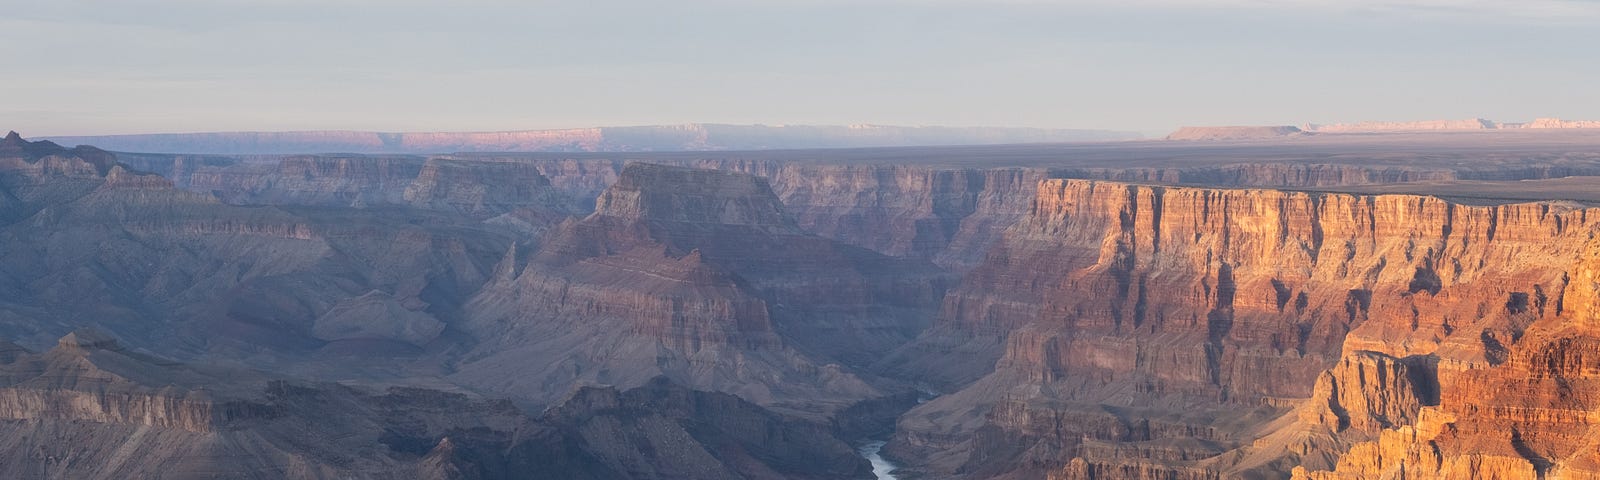 A birds eye view of the Grand Canyon, with the Colorado River cutting through.